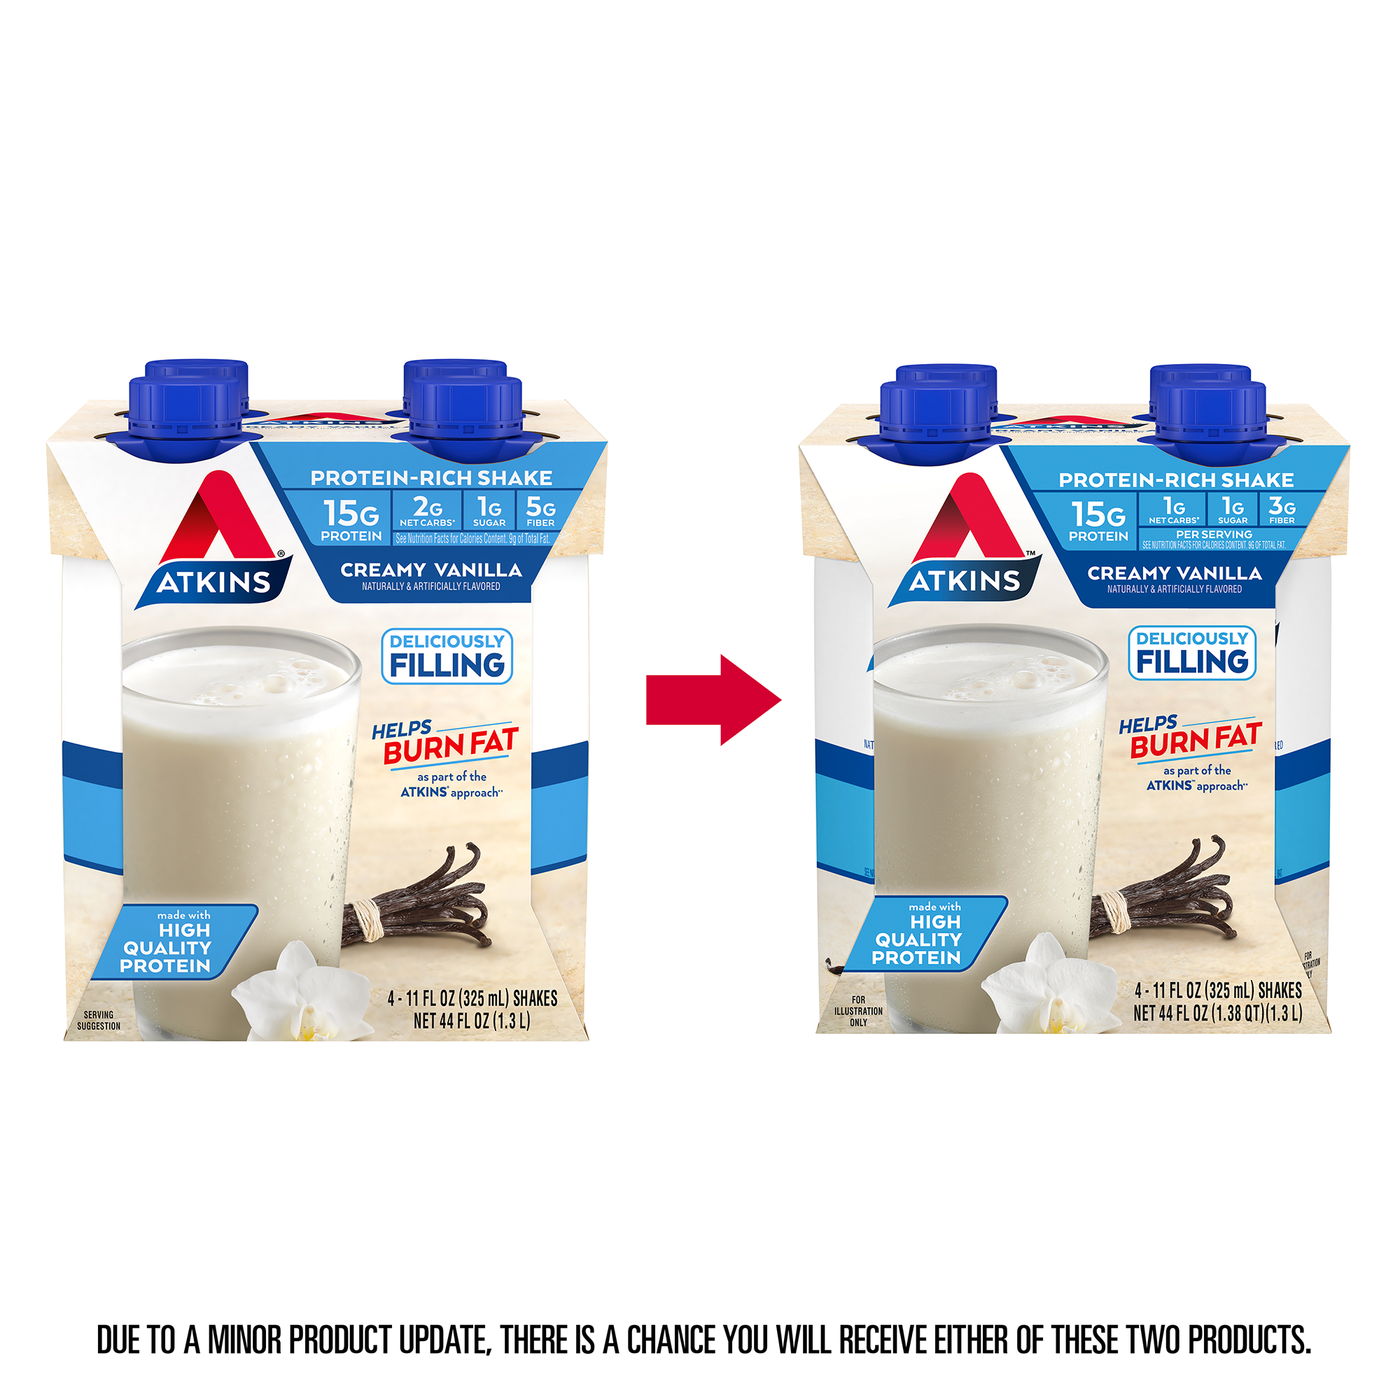 Creamy Vanilla Shake - outdated vs updated packaging